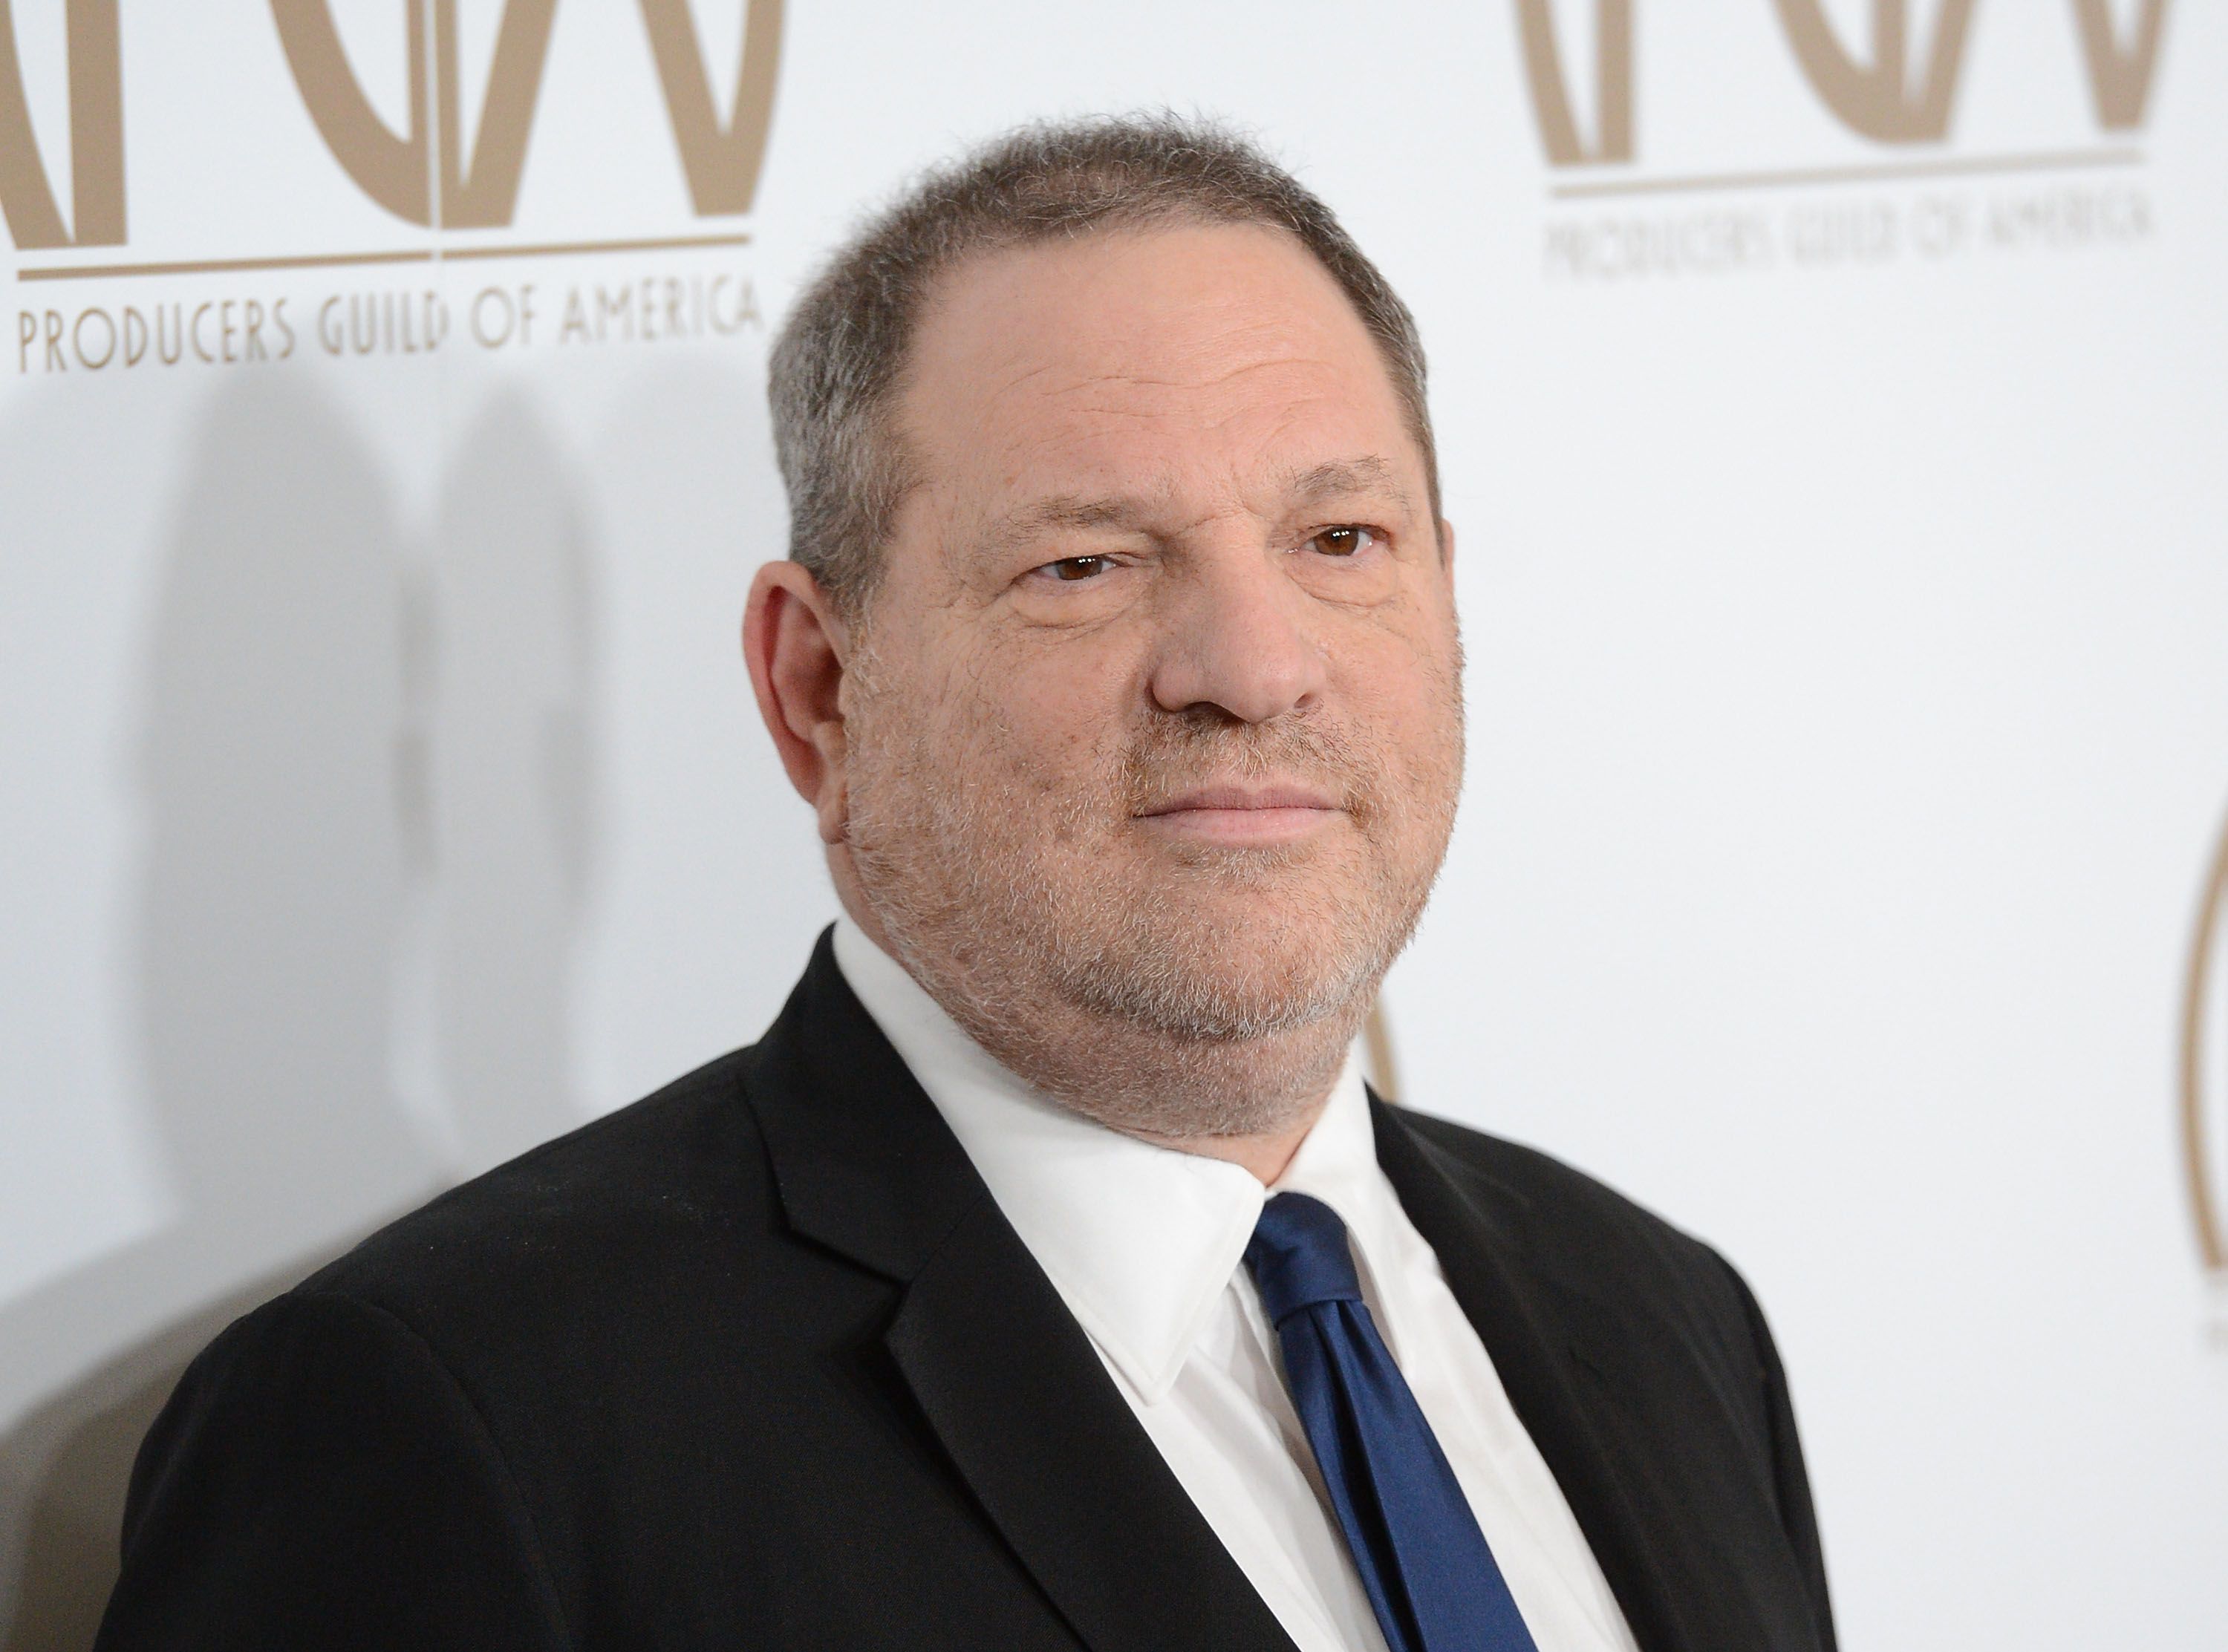  Harvey Weinstein at the 24th Annual Producers Guild Awards in 2013 in Beverly Hills, California | Source: Getty Images